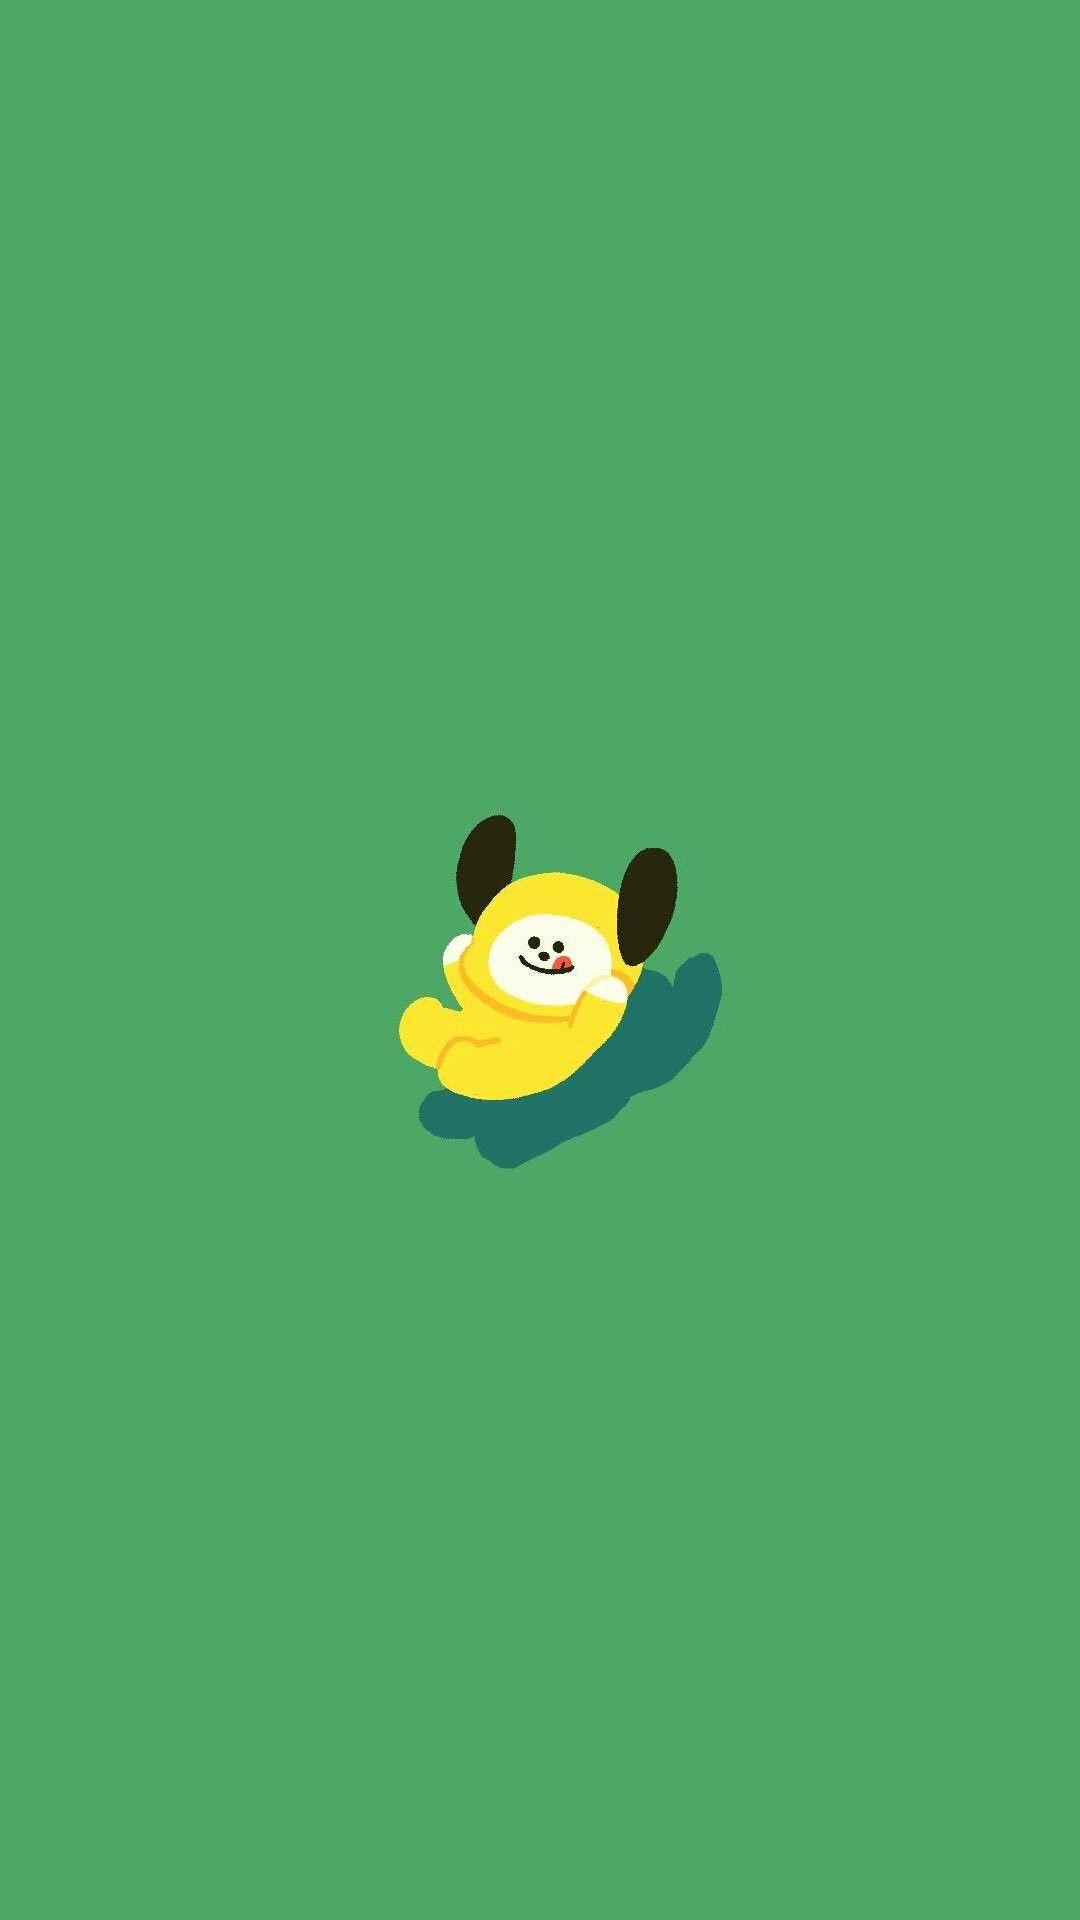 Chimmy Bt21 Wallpapers Top Free Chimmy Bt21 Backgrounds Wallpaperaccess Bt21 bts cute pictures explore and share bts wallpaper hd on wallpapersafari. chimmy bt21 wallpapers top free